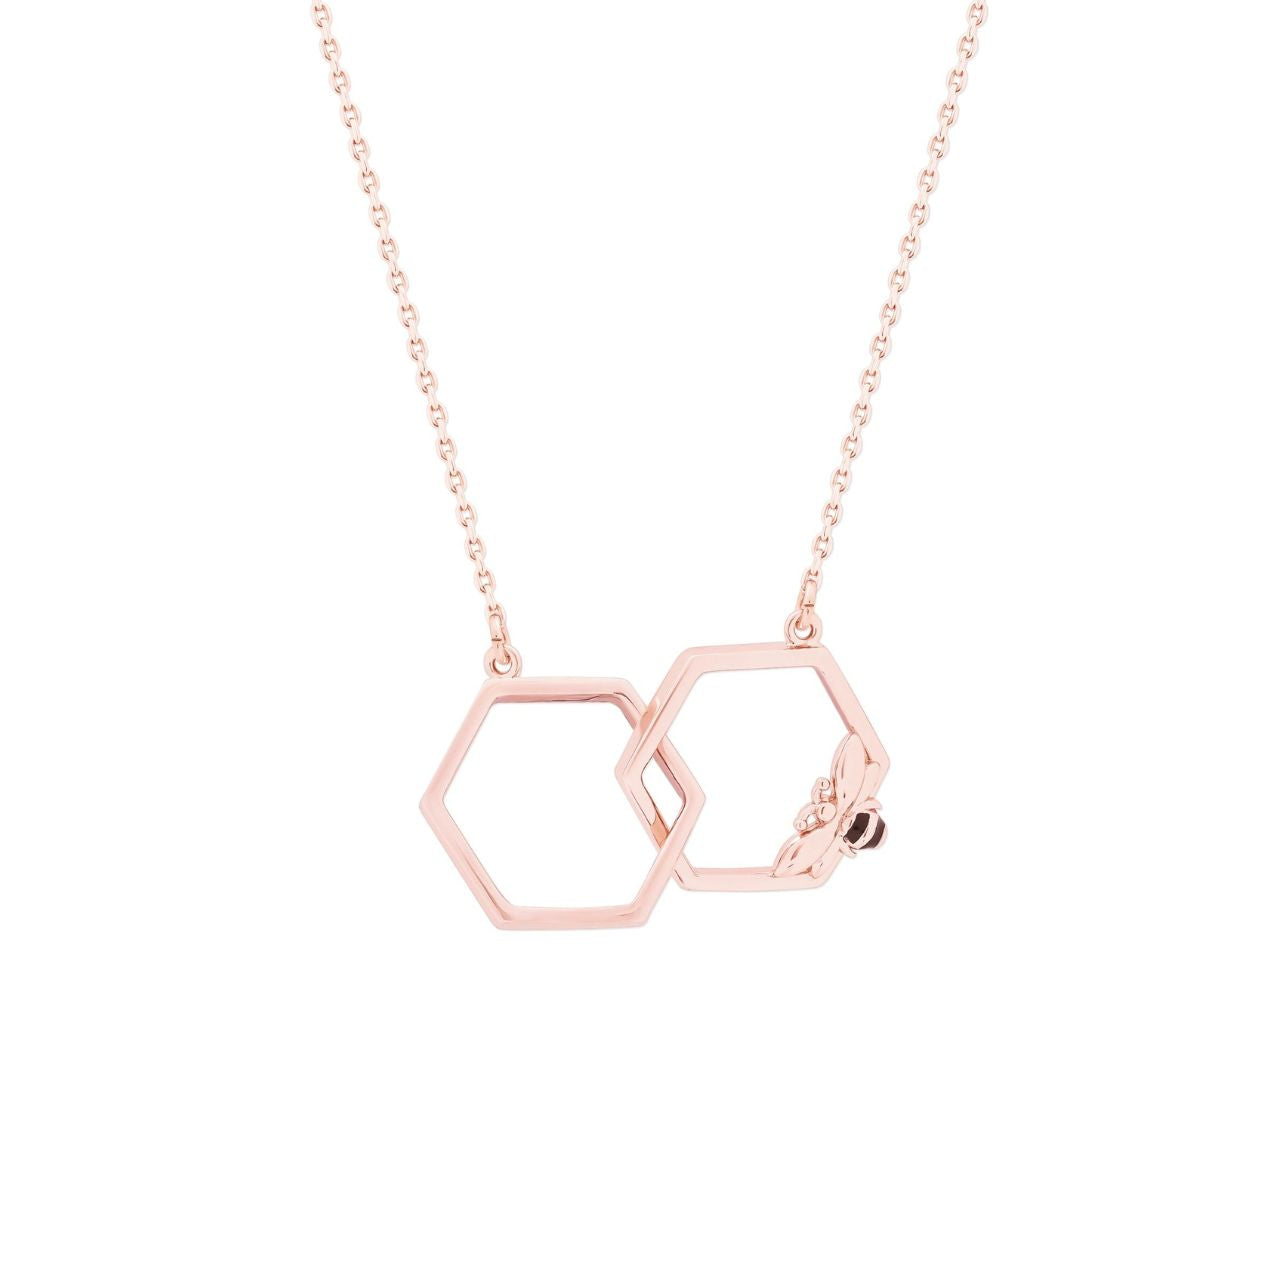 Tipperary Crystal Bee Rose Gold Hexagonal Infinity Pendant - New Winter 2022